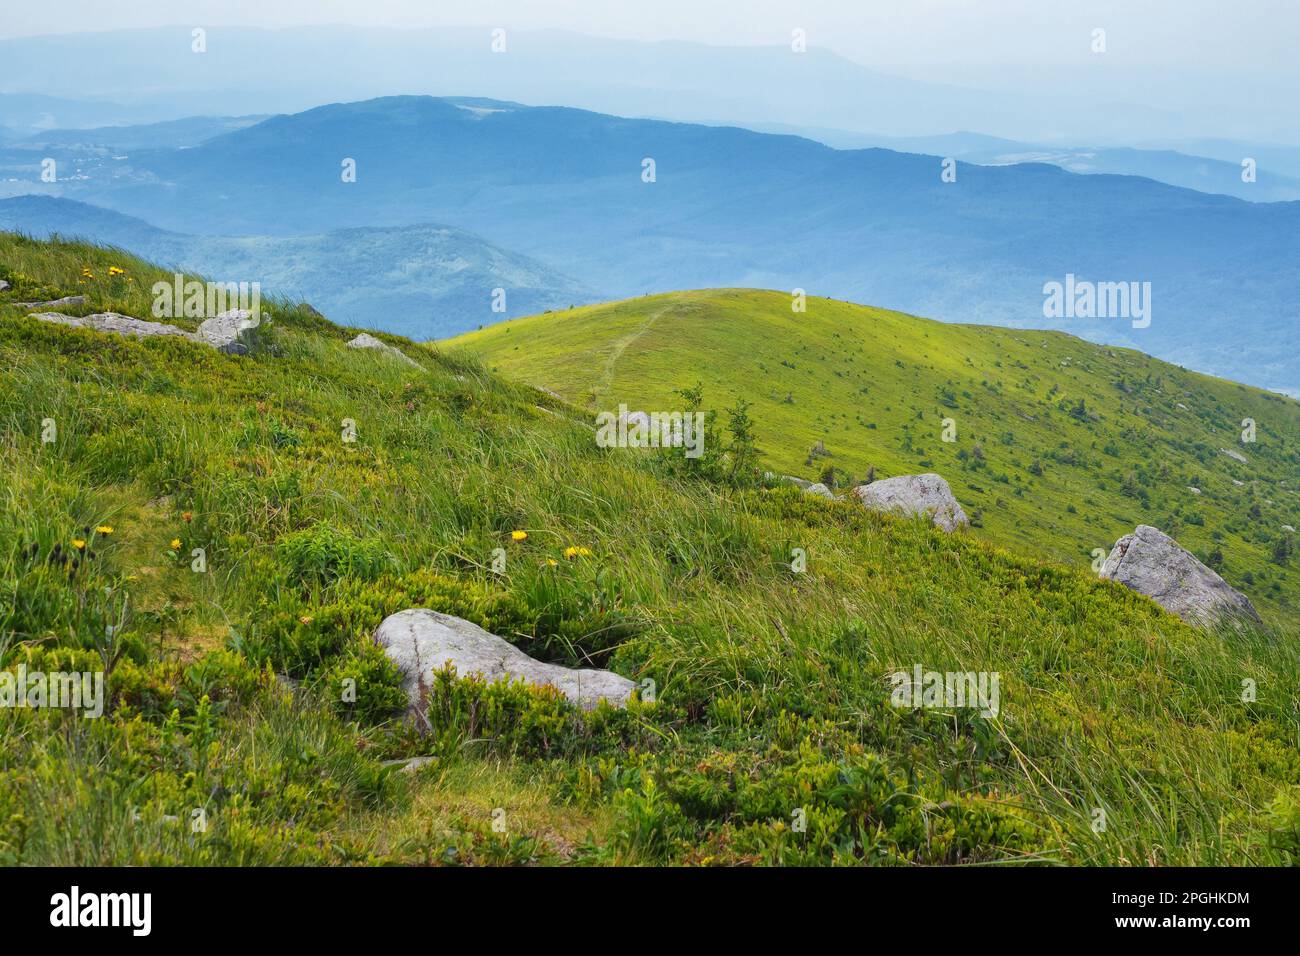 grassy meadow landscape of ukrainian mountains. carpathian countryside in summer. sunny morning with clouds on the sky Stock Photo